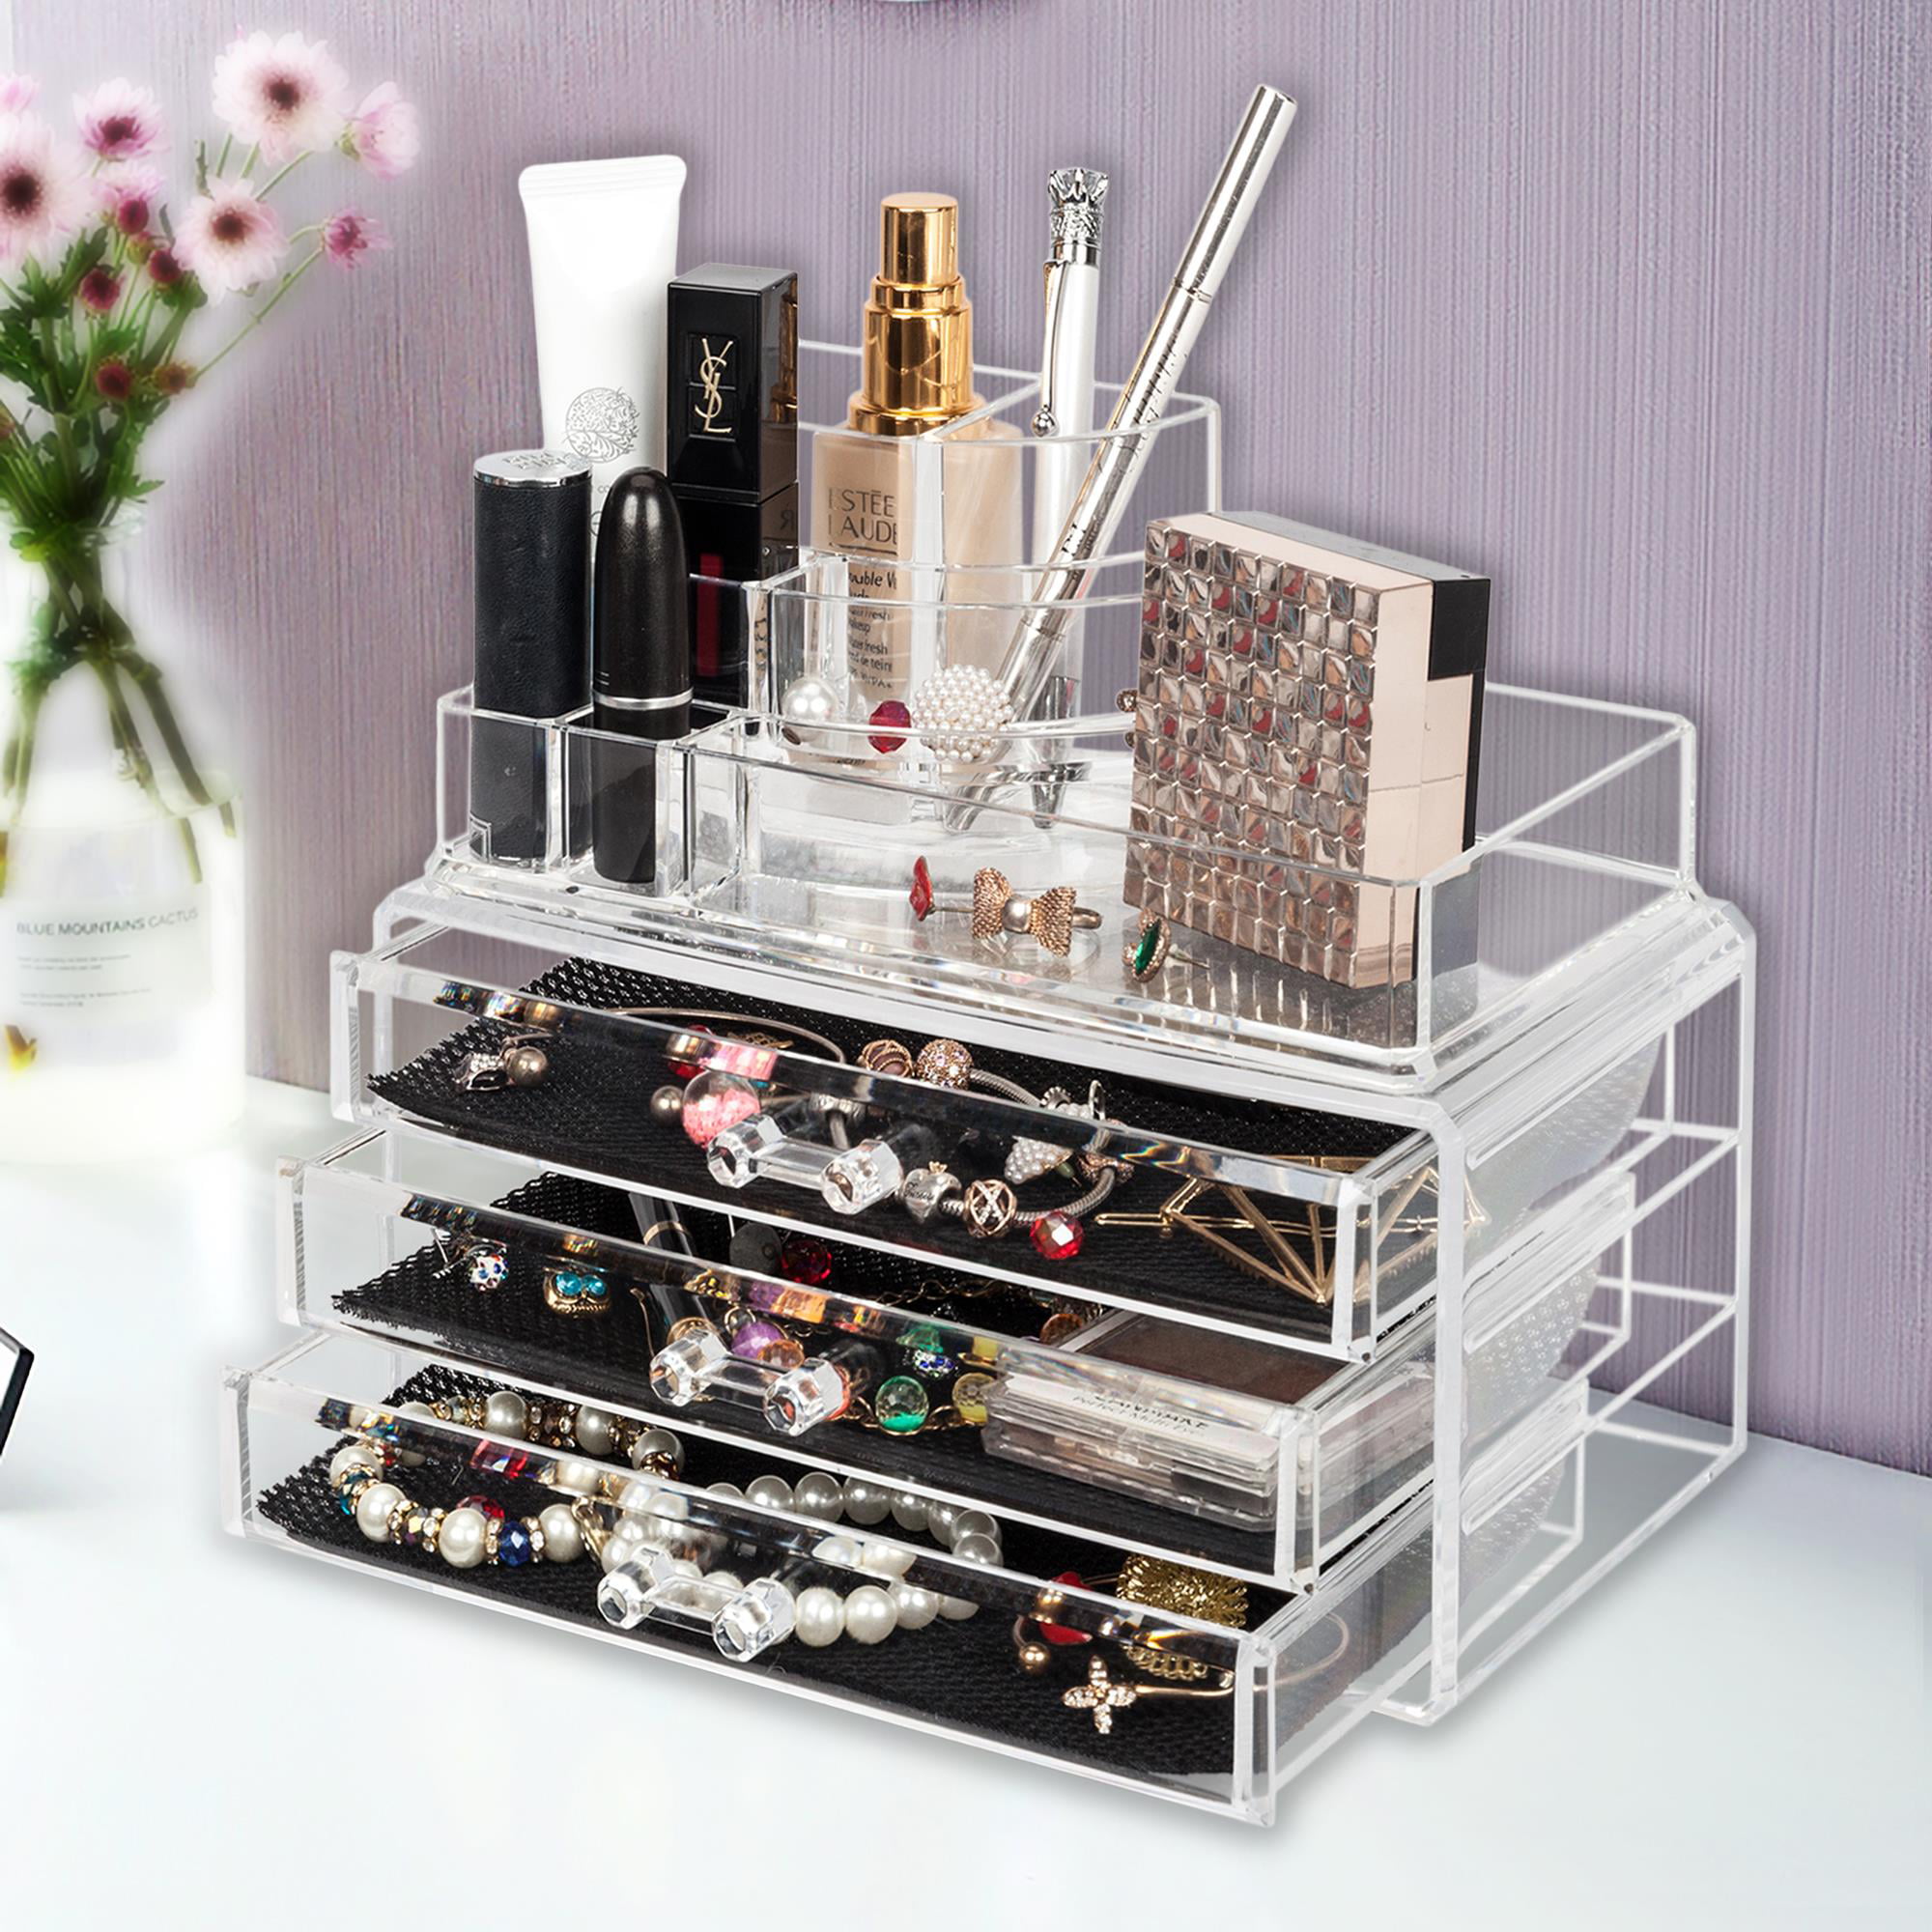 Ktaxon Acrylic Makeup Case Cosmetic Home Organizer Drawers Holder